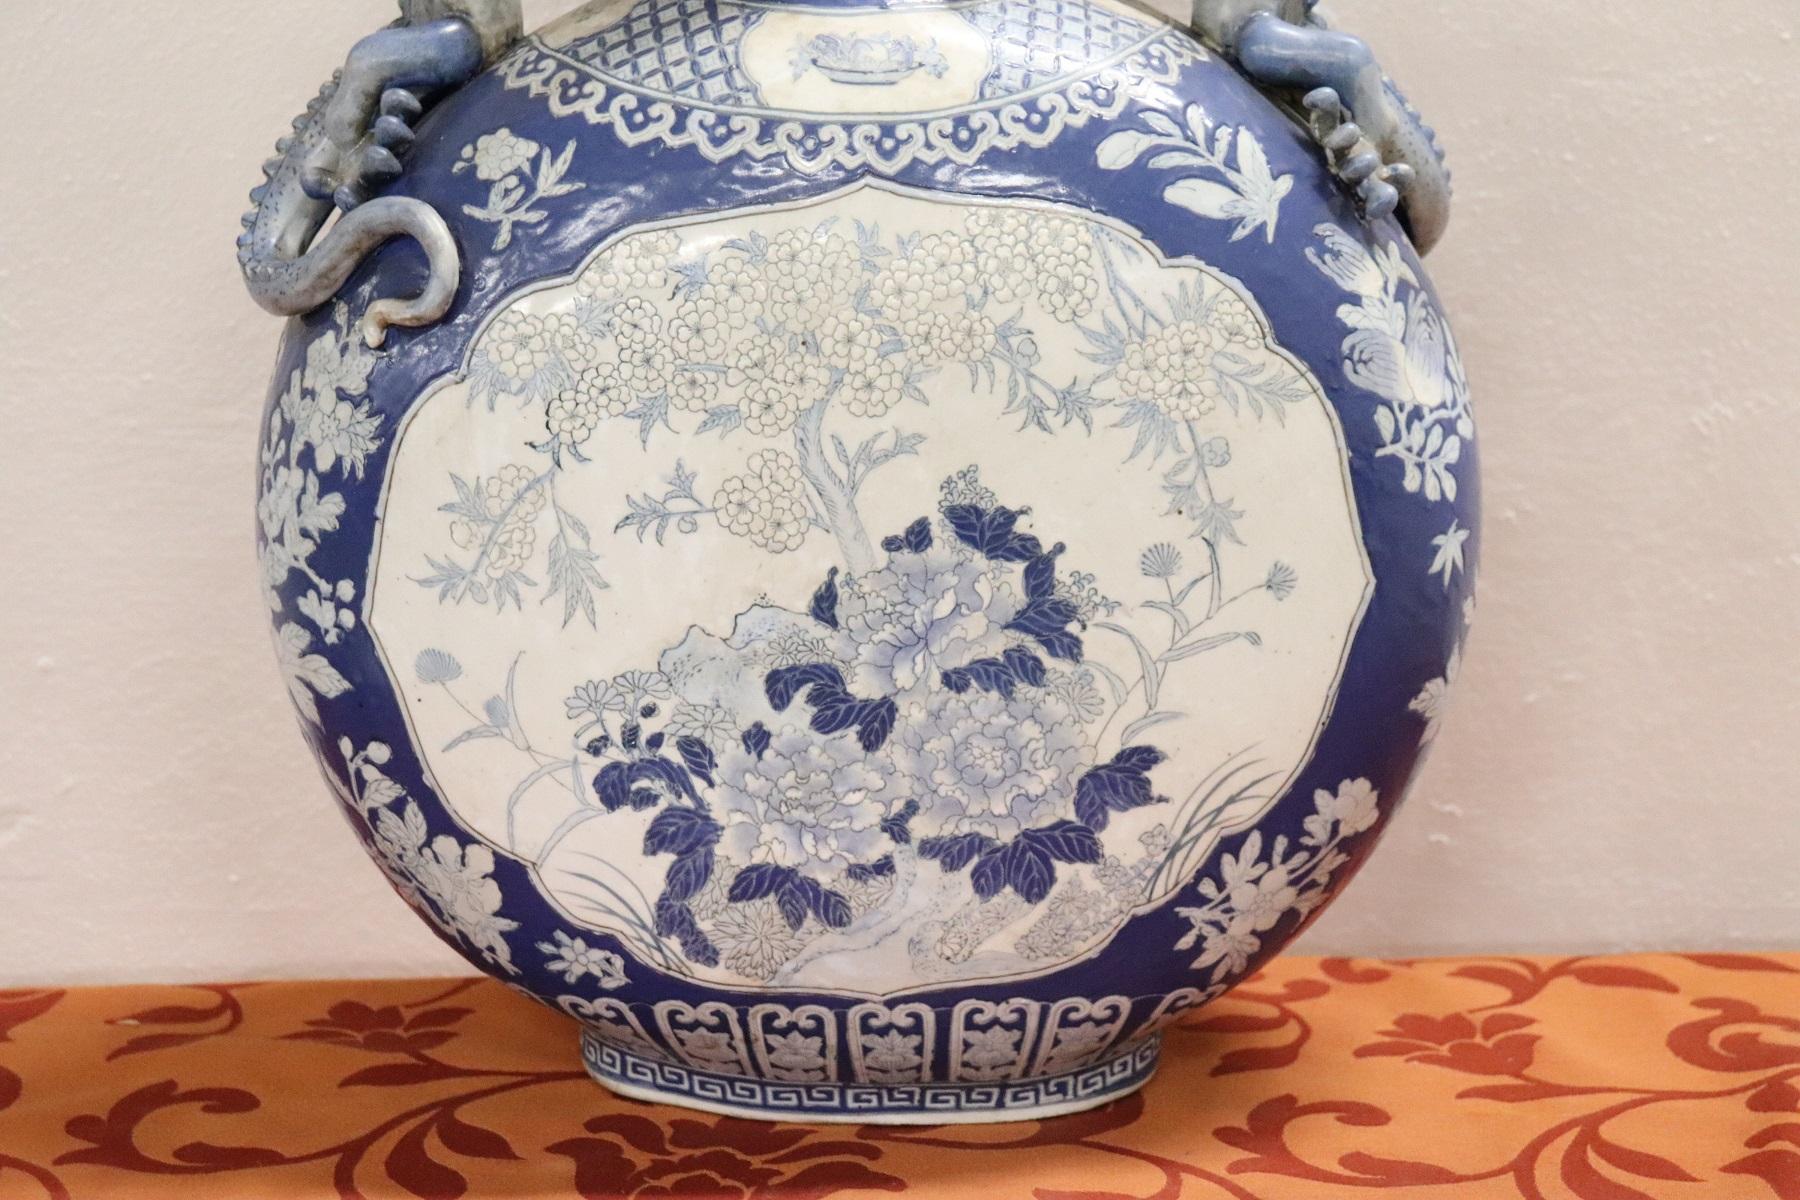 20th Century Chinese Hand Painted Vase in Ceramic blue and Floral Motifs (Chinesisch)